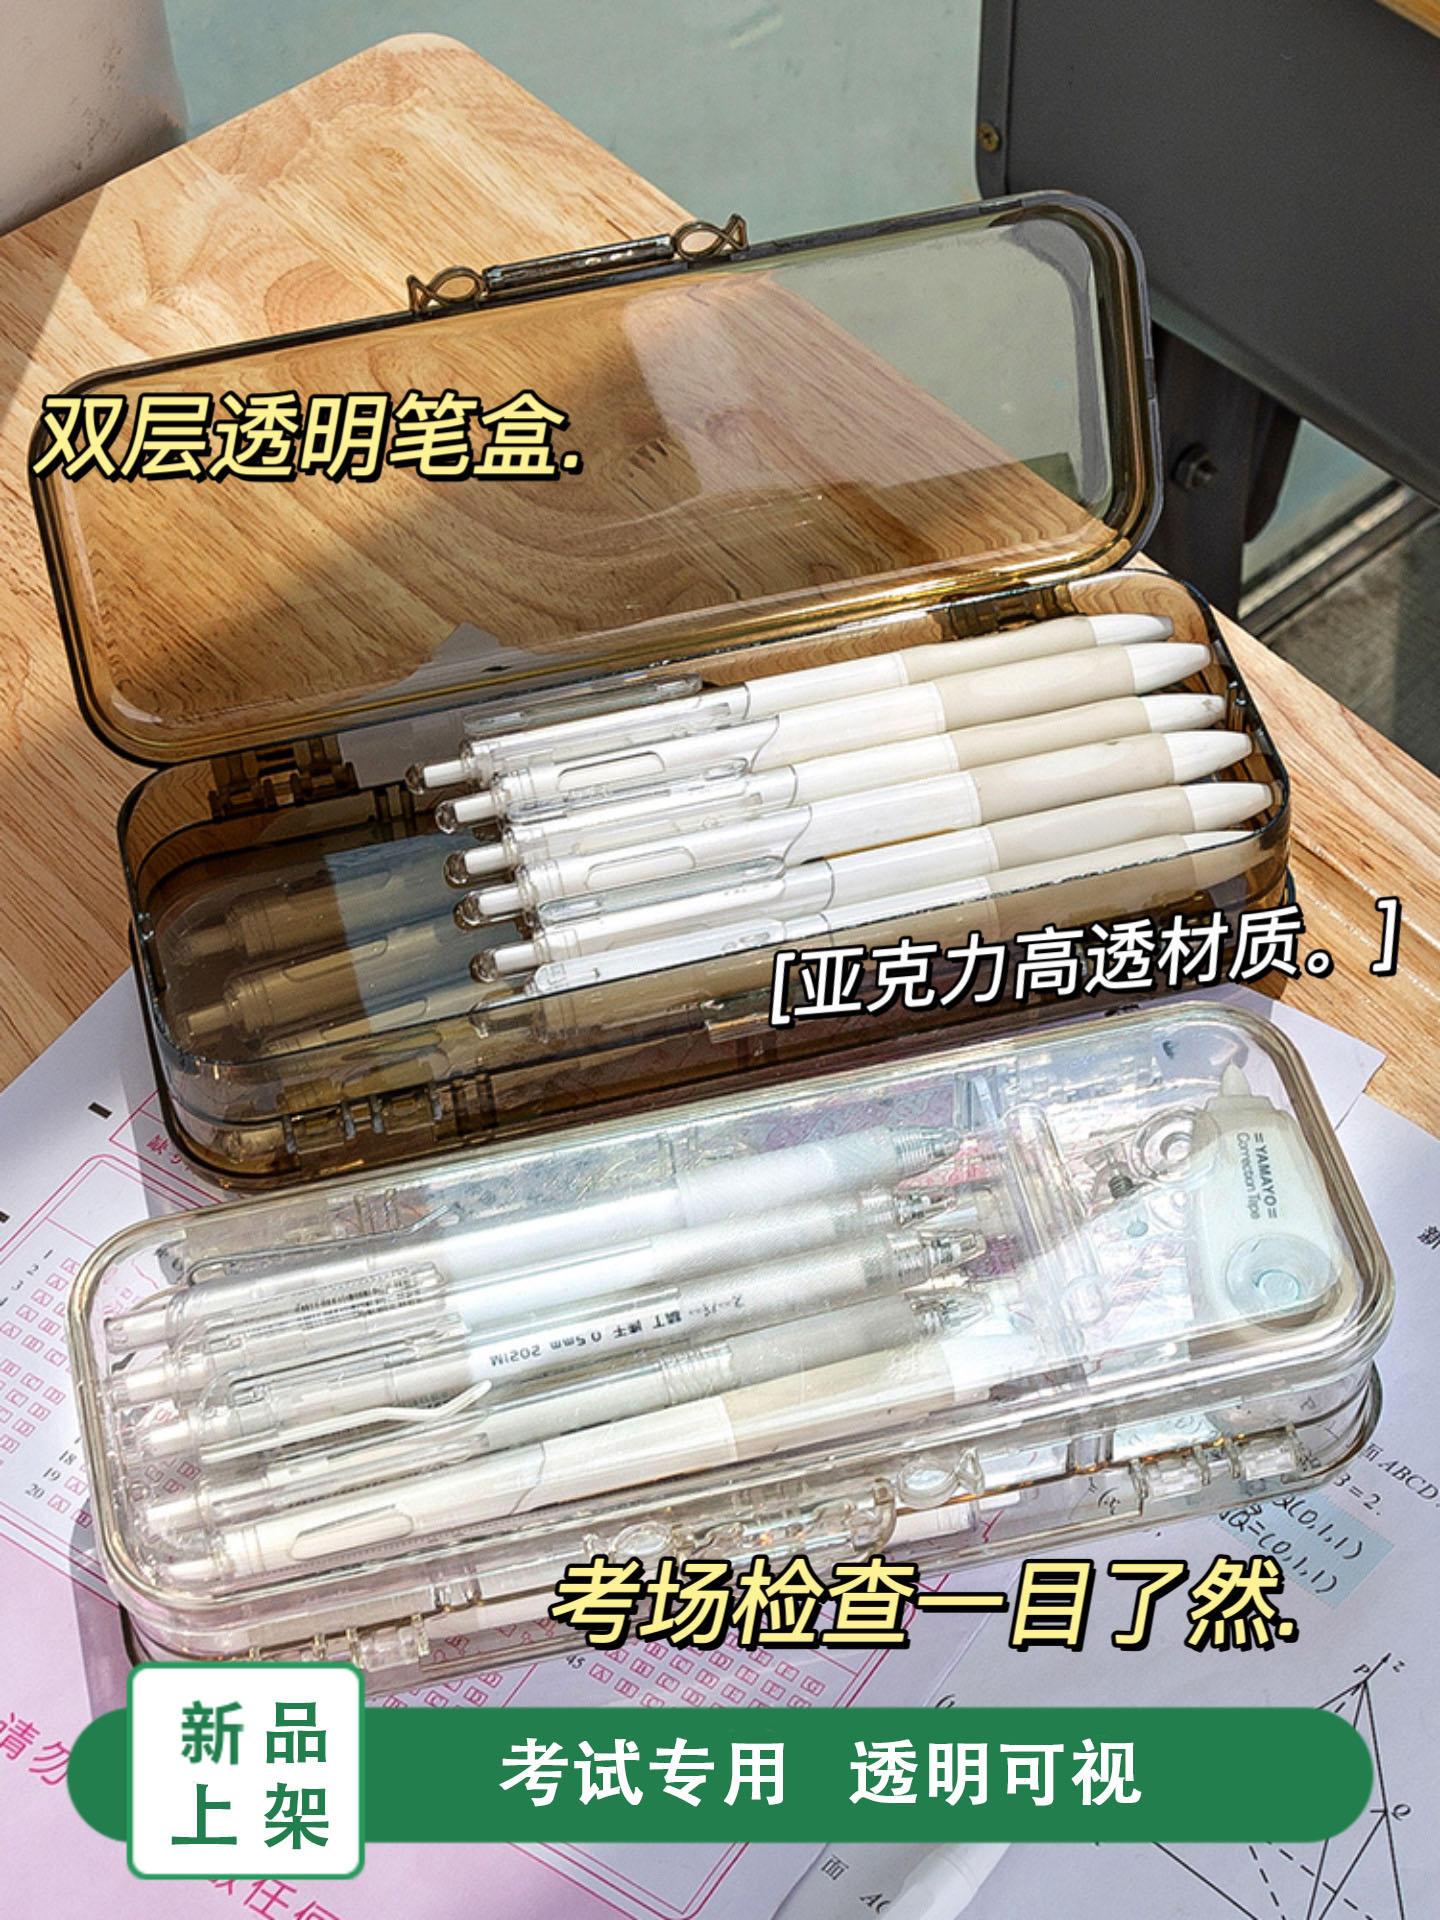 Acrylic transparent pencil case exam special double layer of pencil case exam for college entrance exam boy girl girl girl with lead pencil case elementary school students junior high school children brief day department pen bag stationery supplies great all-Taobao